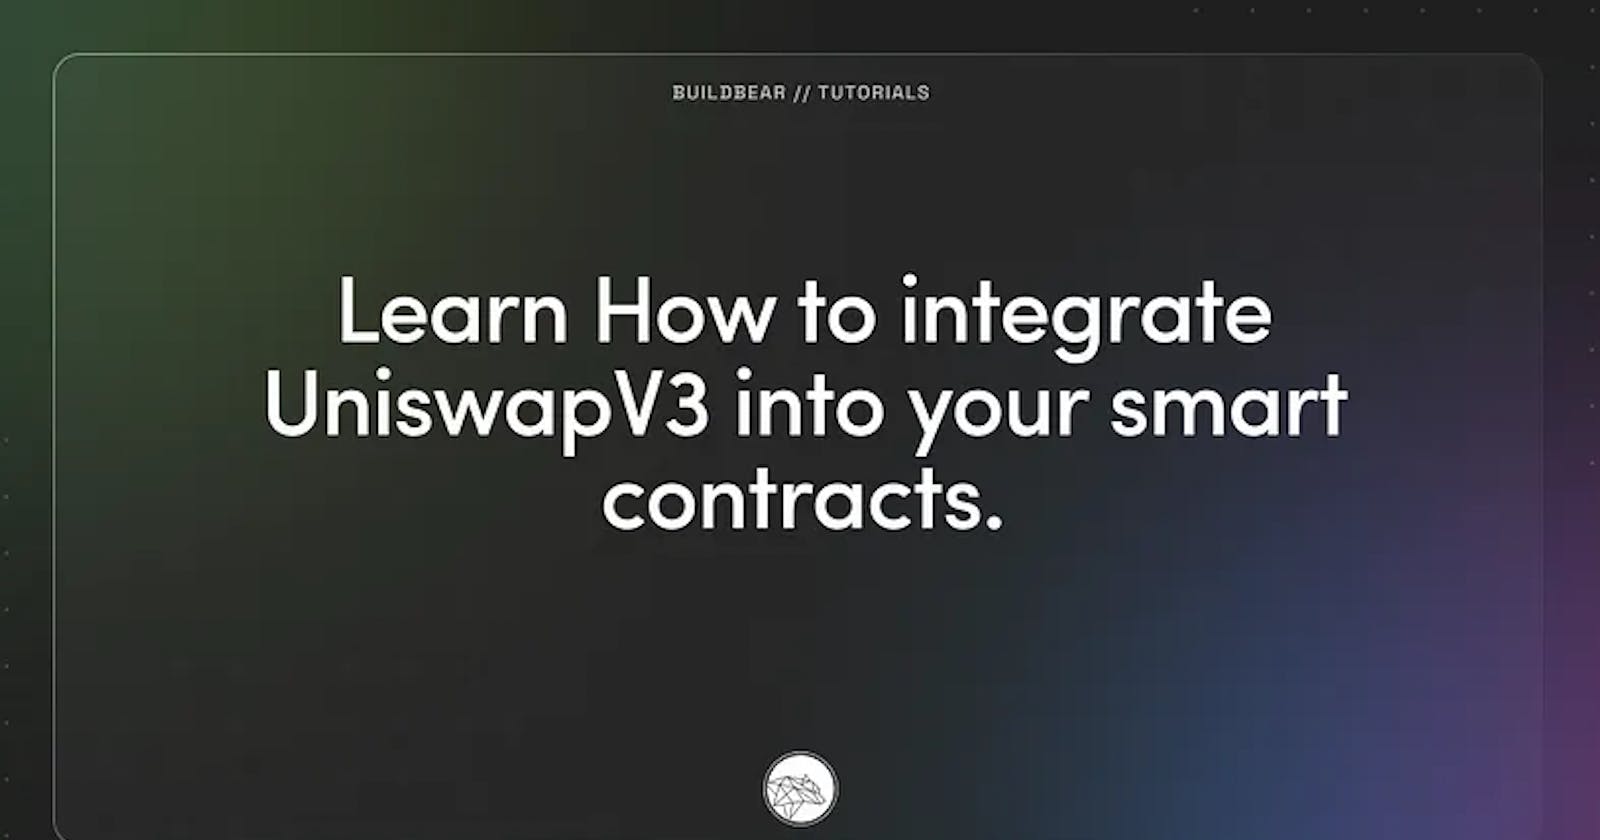 Learn How to integrate UniswapV3 into your smart contracts.